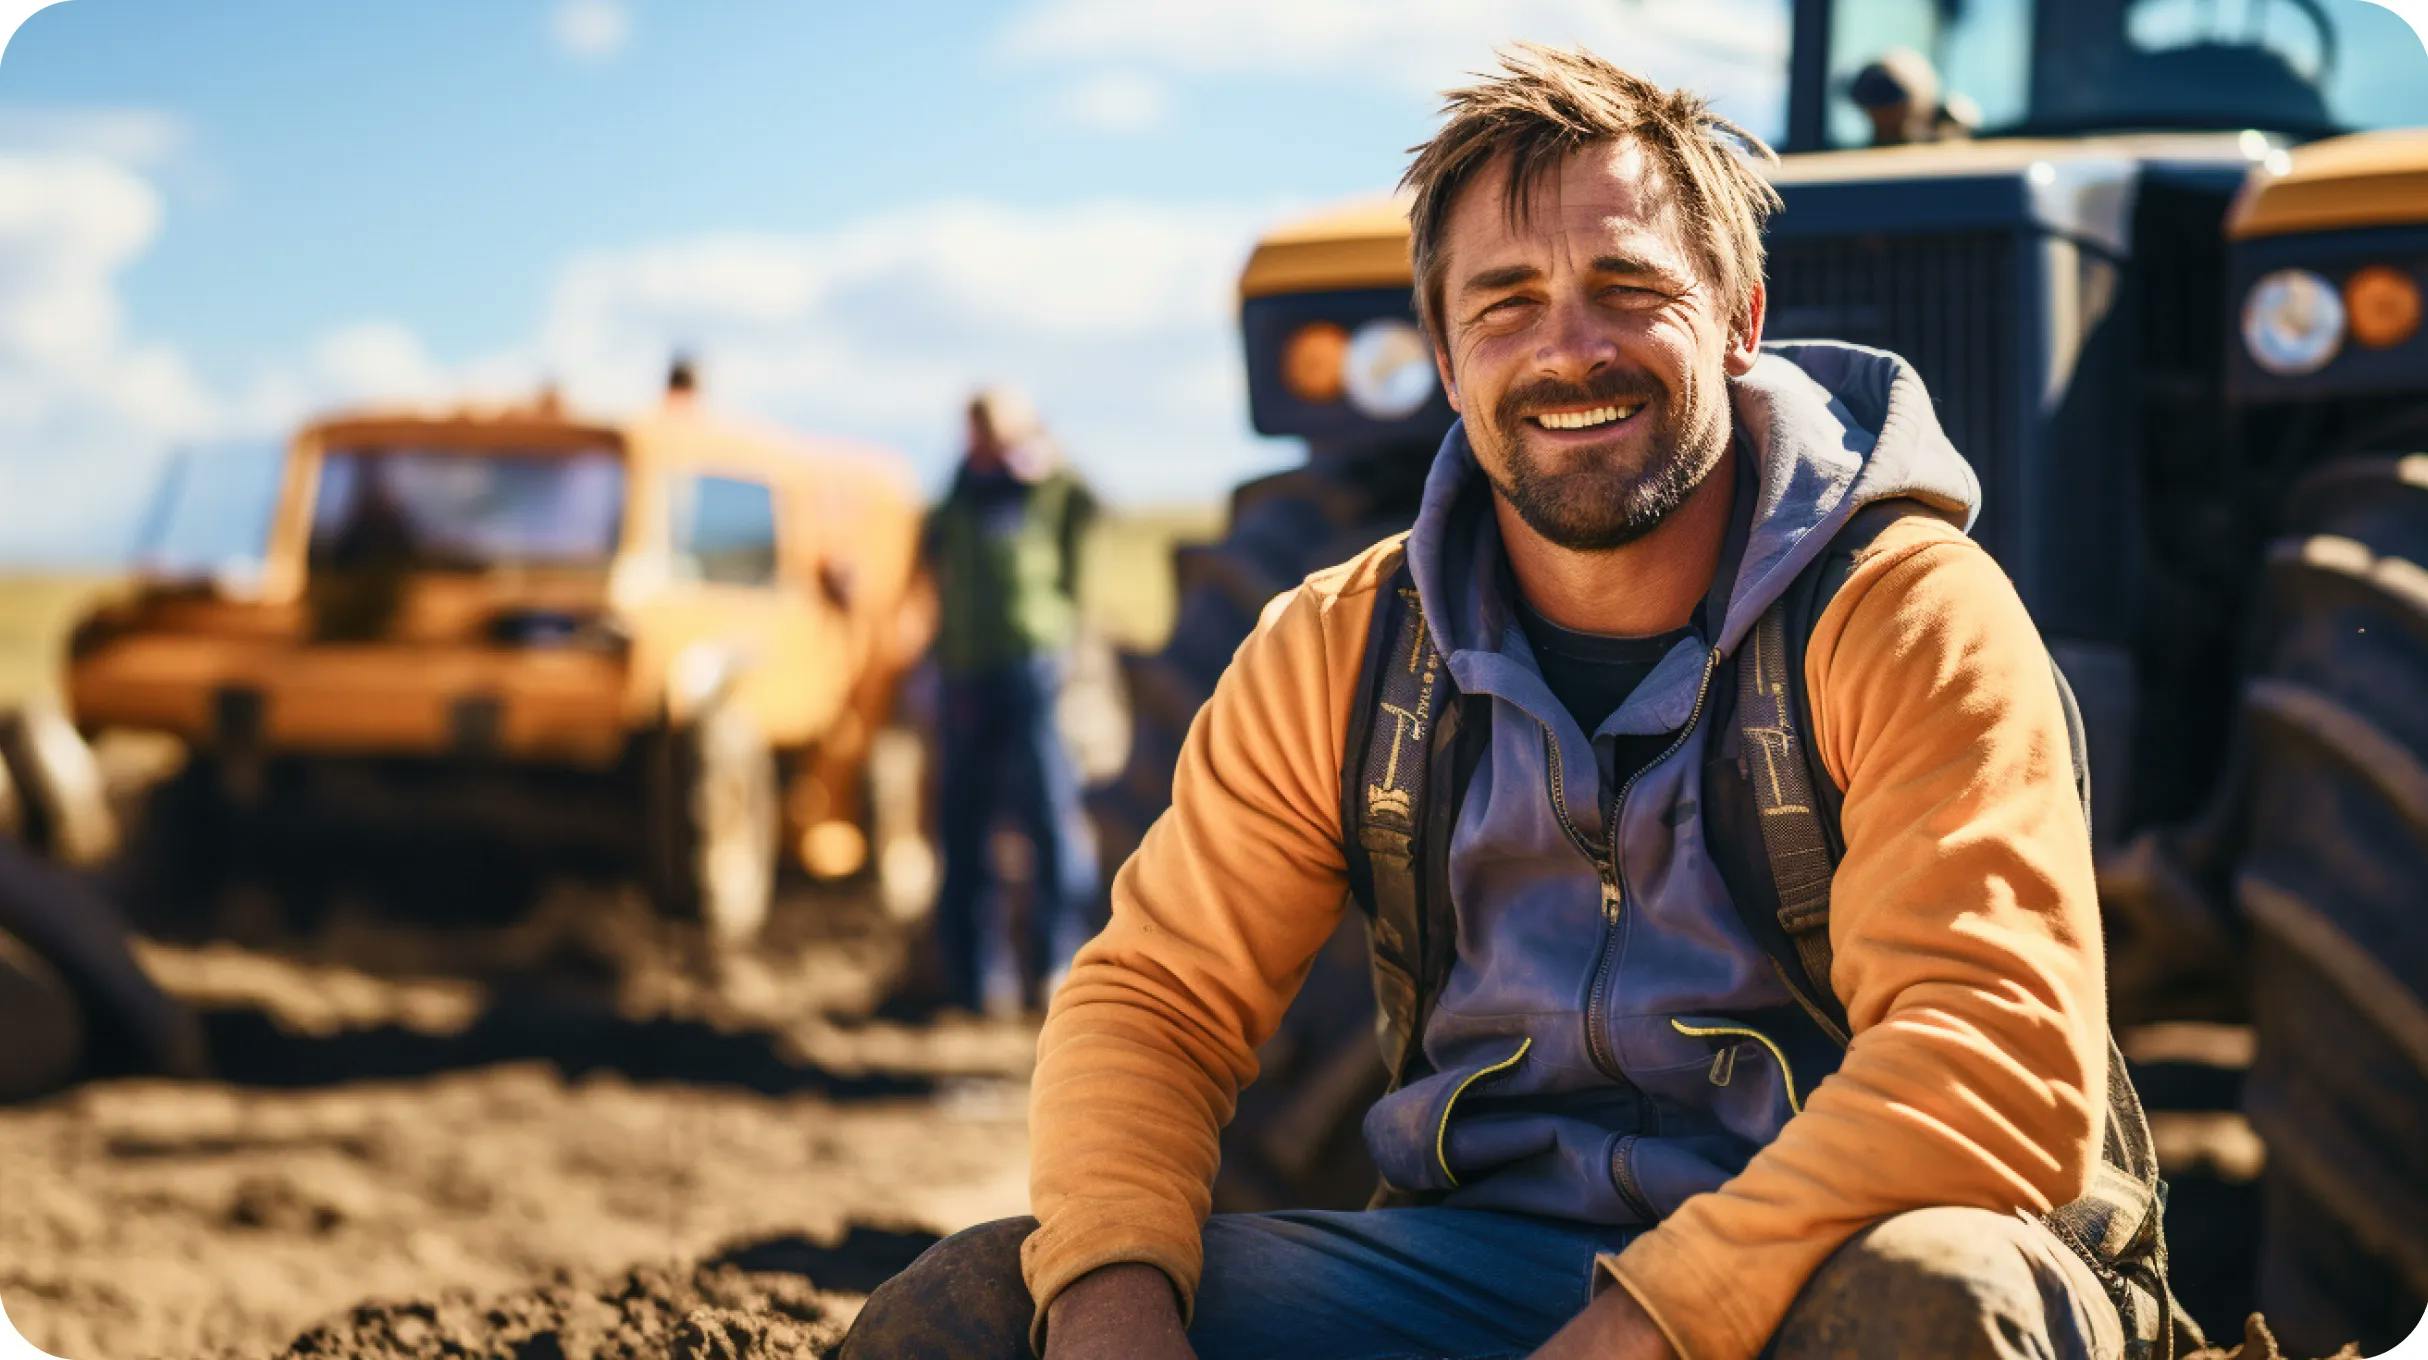 A construction worker sitting on a ground, with heavy equipment in the background